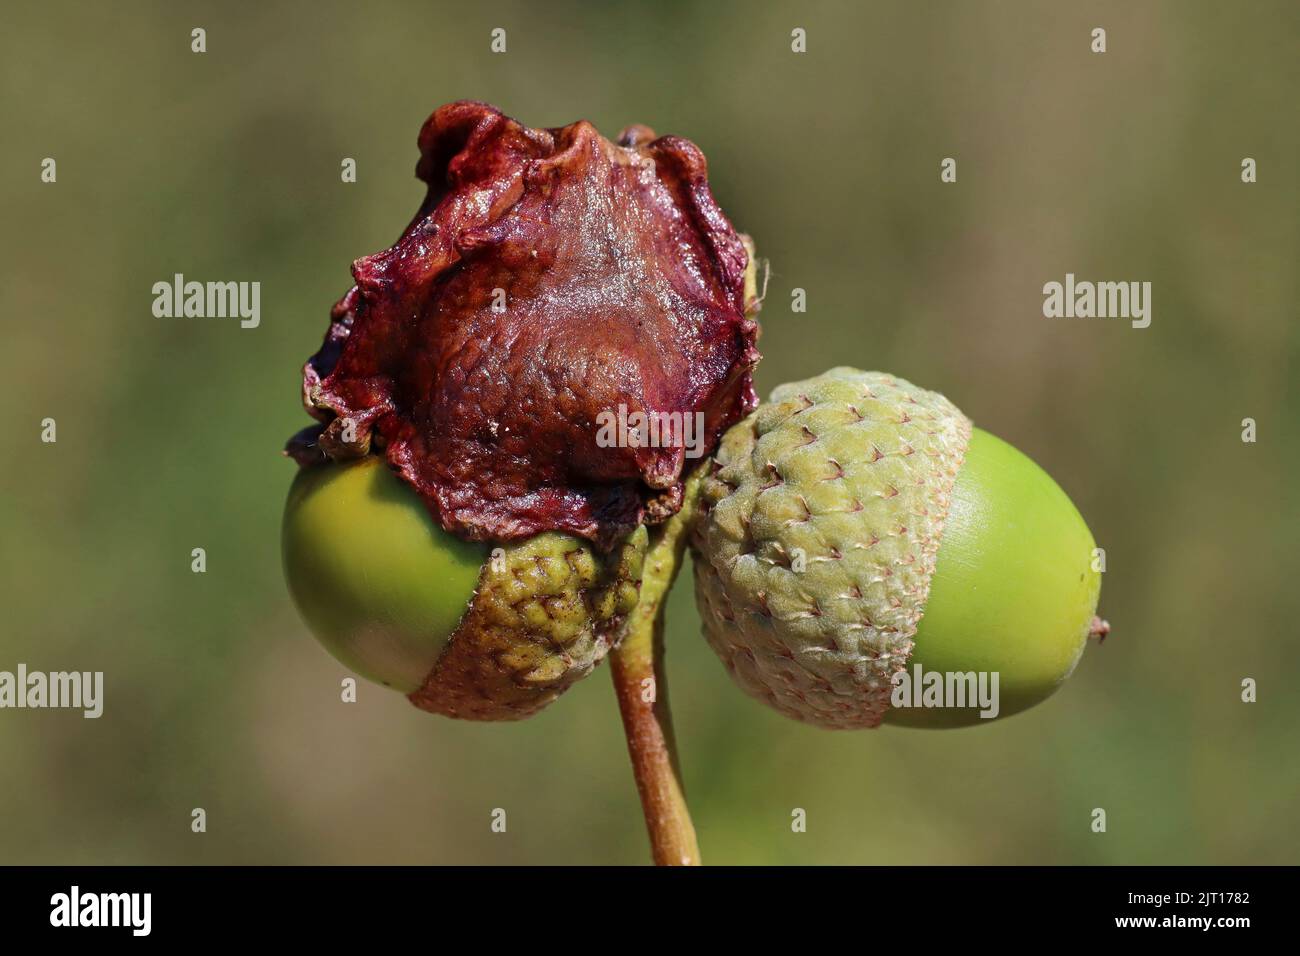 Oak Knopper Gall on Acorn Caused By The Gall Wasp Andricus quercuscalicis Stock Photo